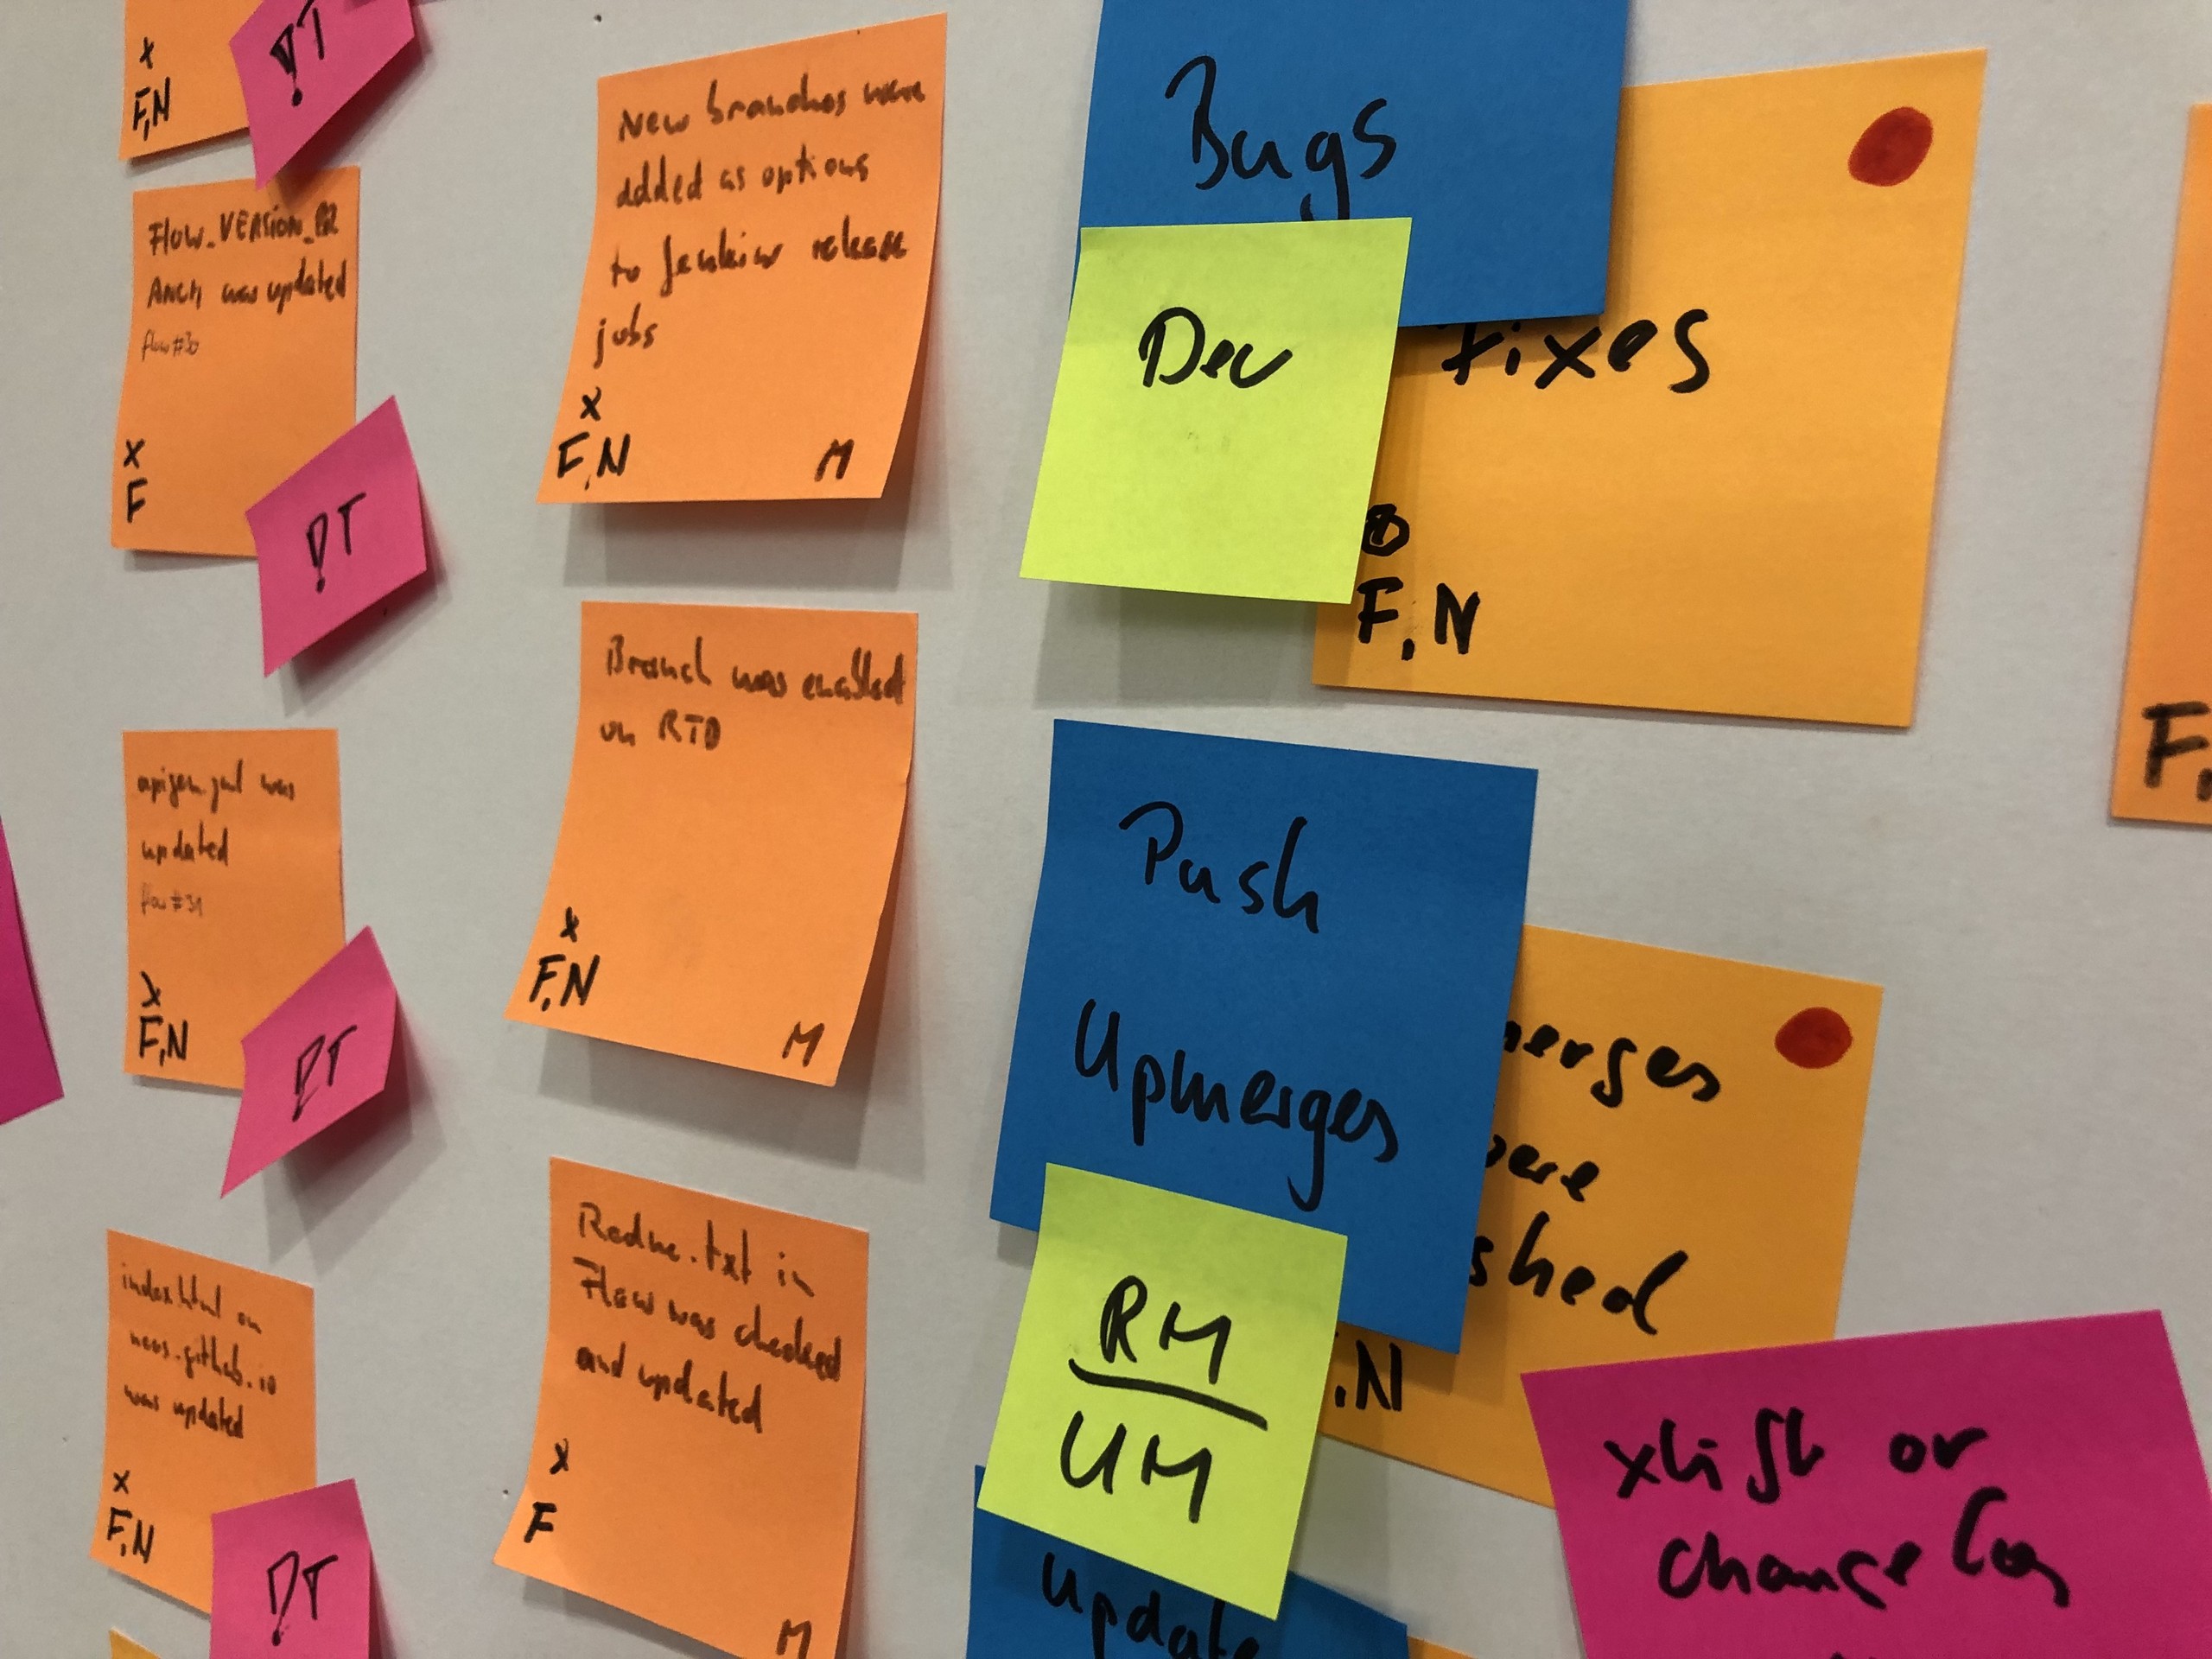 Close-up of EventStorming board.